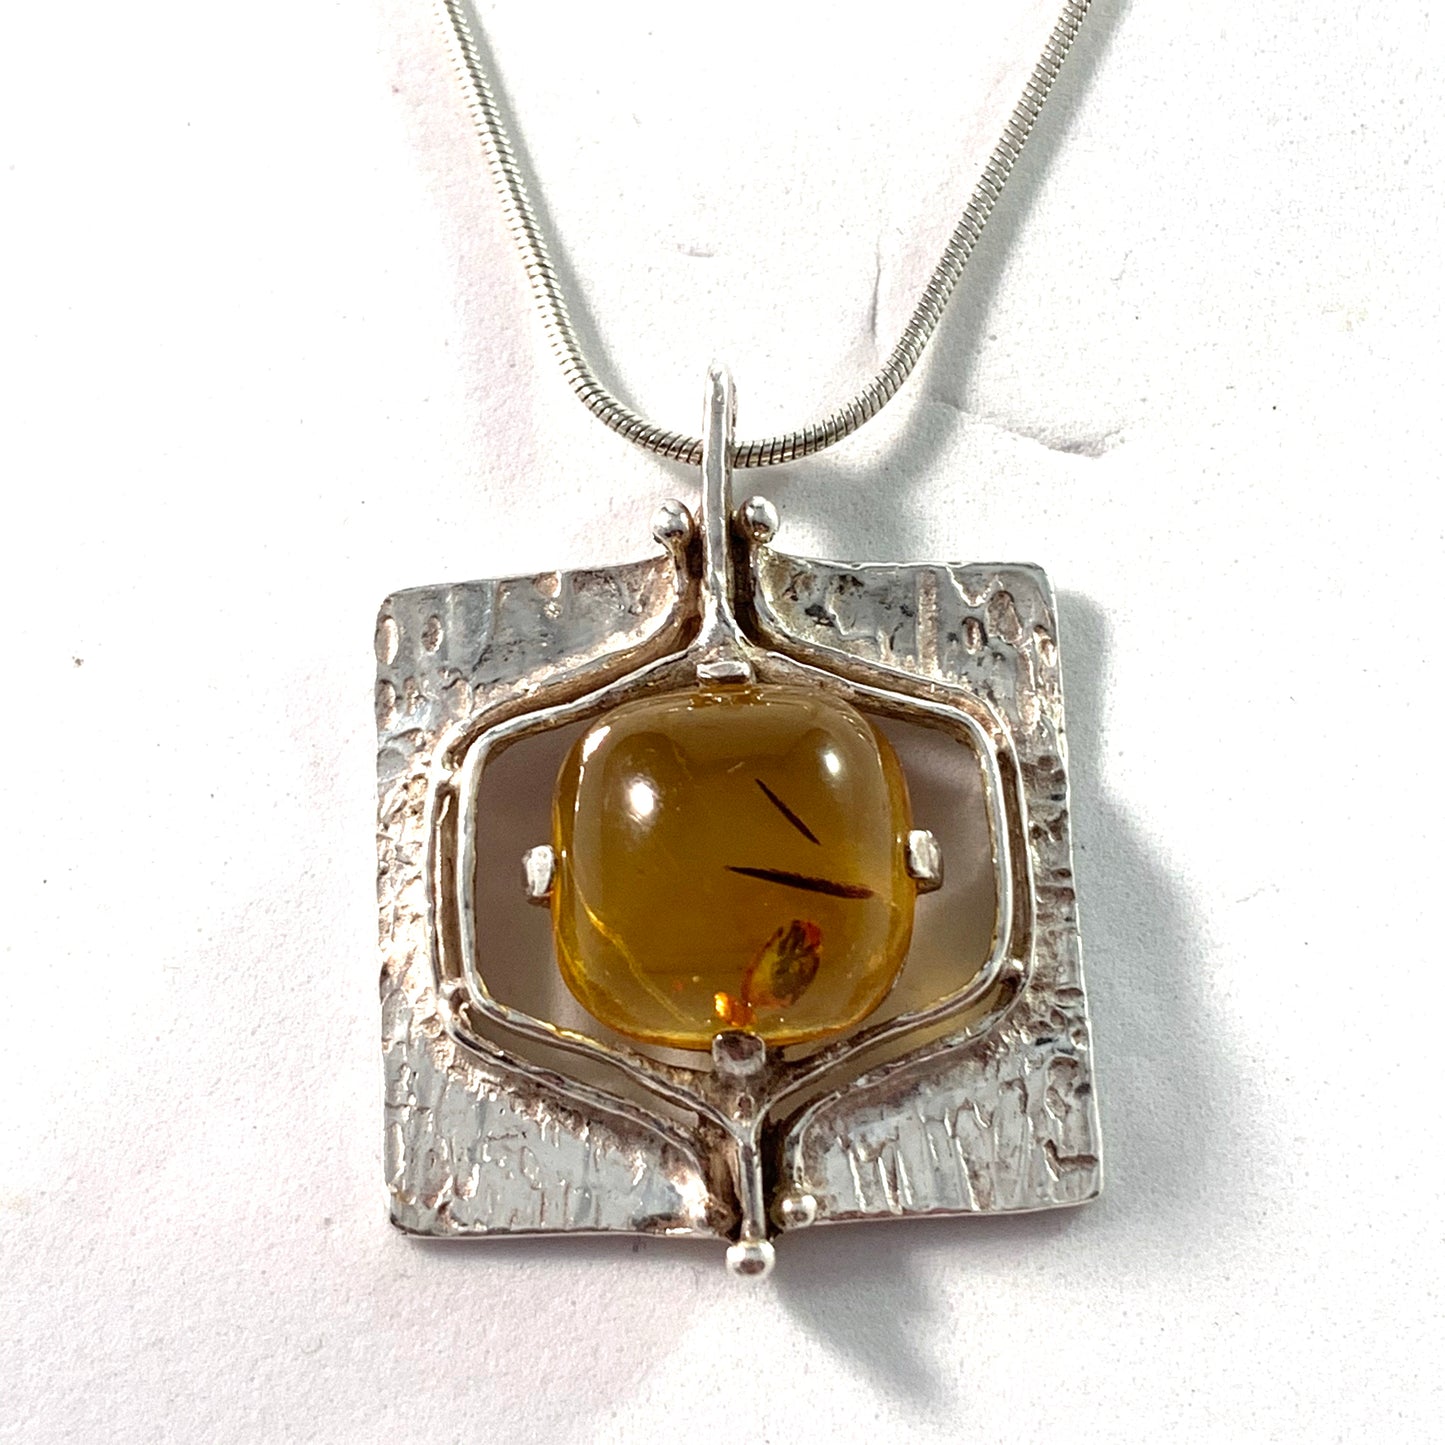 Teka, Theodor Klotz, Germany 1960s Sterling Silver Baltic Amber Pendant Necklace.